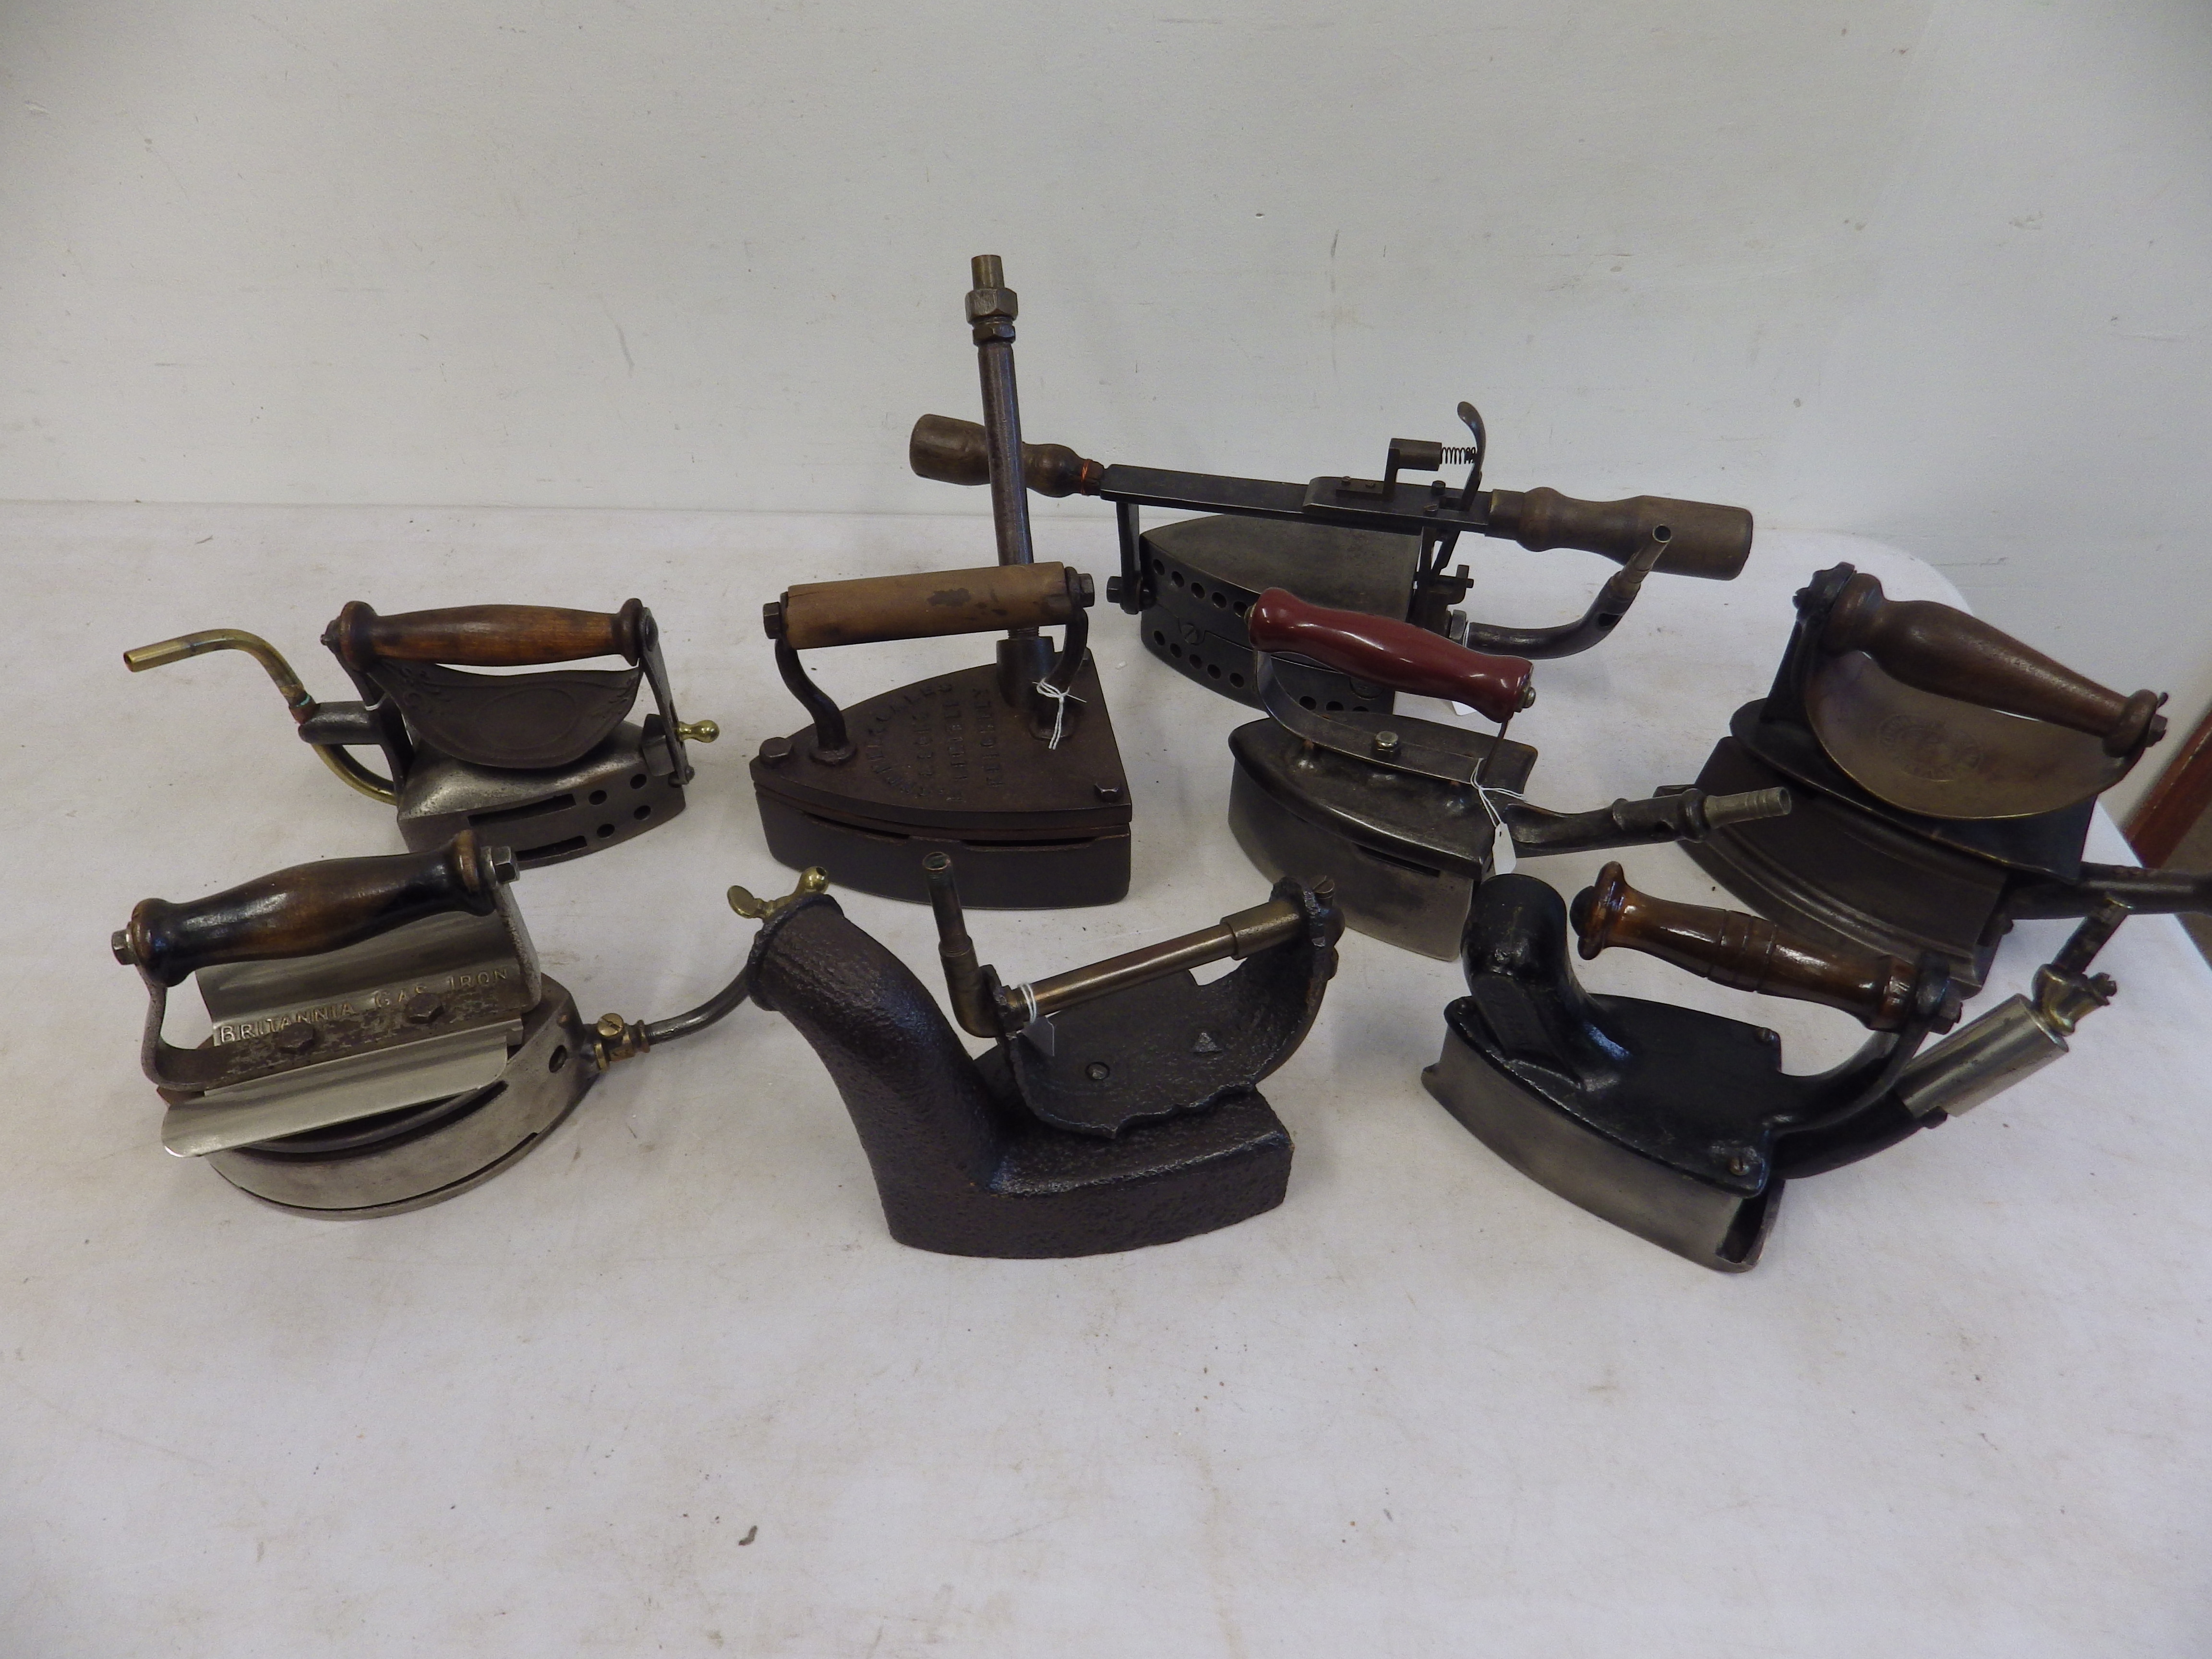 8 assorted gas irons to incl 2 x turn over gas irons, Brittania patent 238701/24, Izot? patent